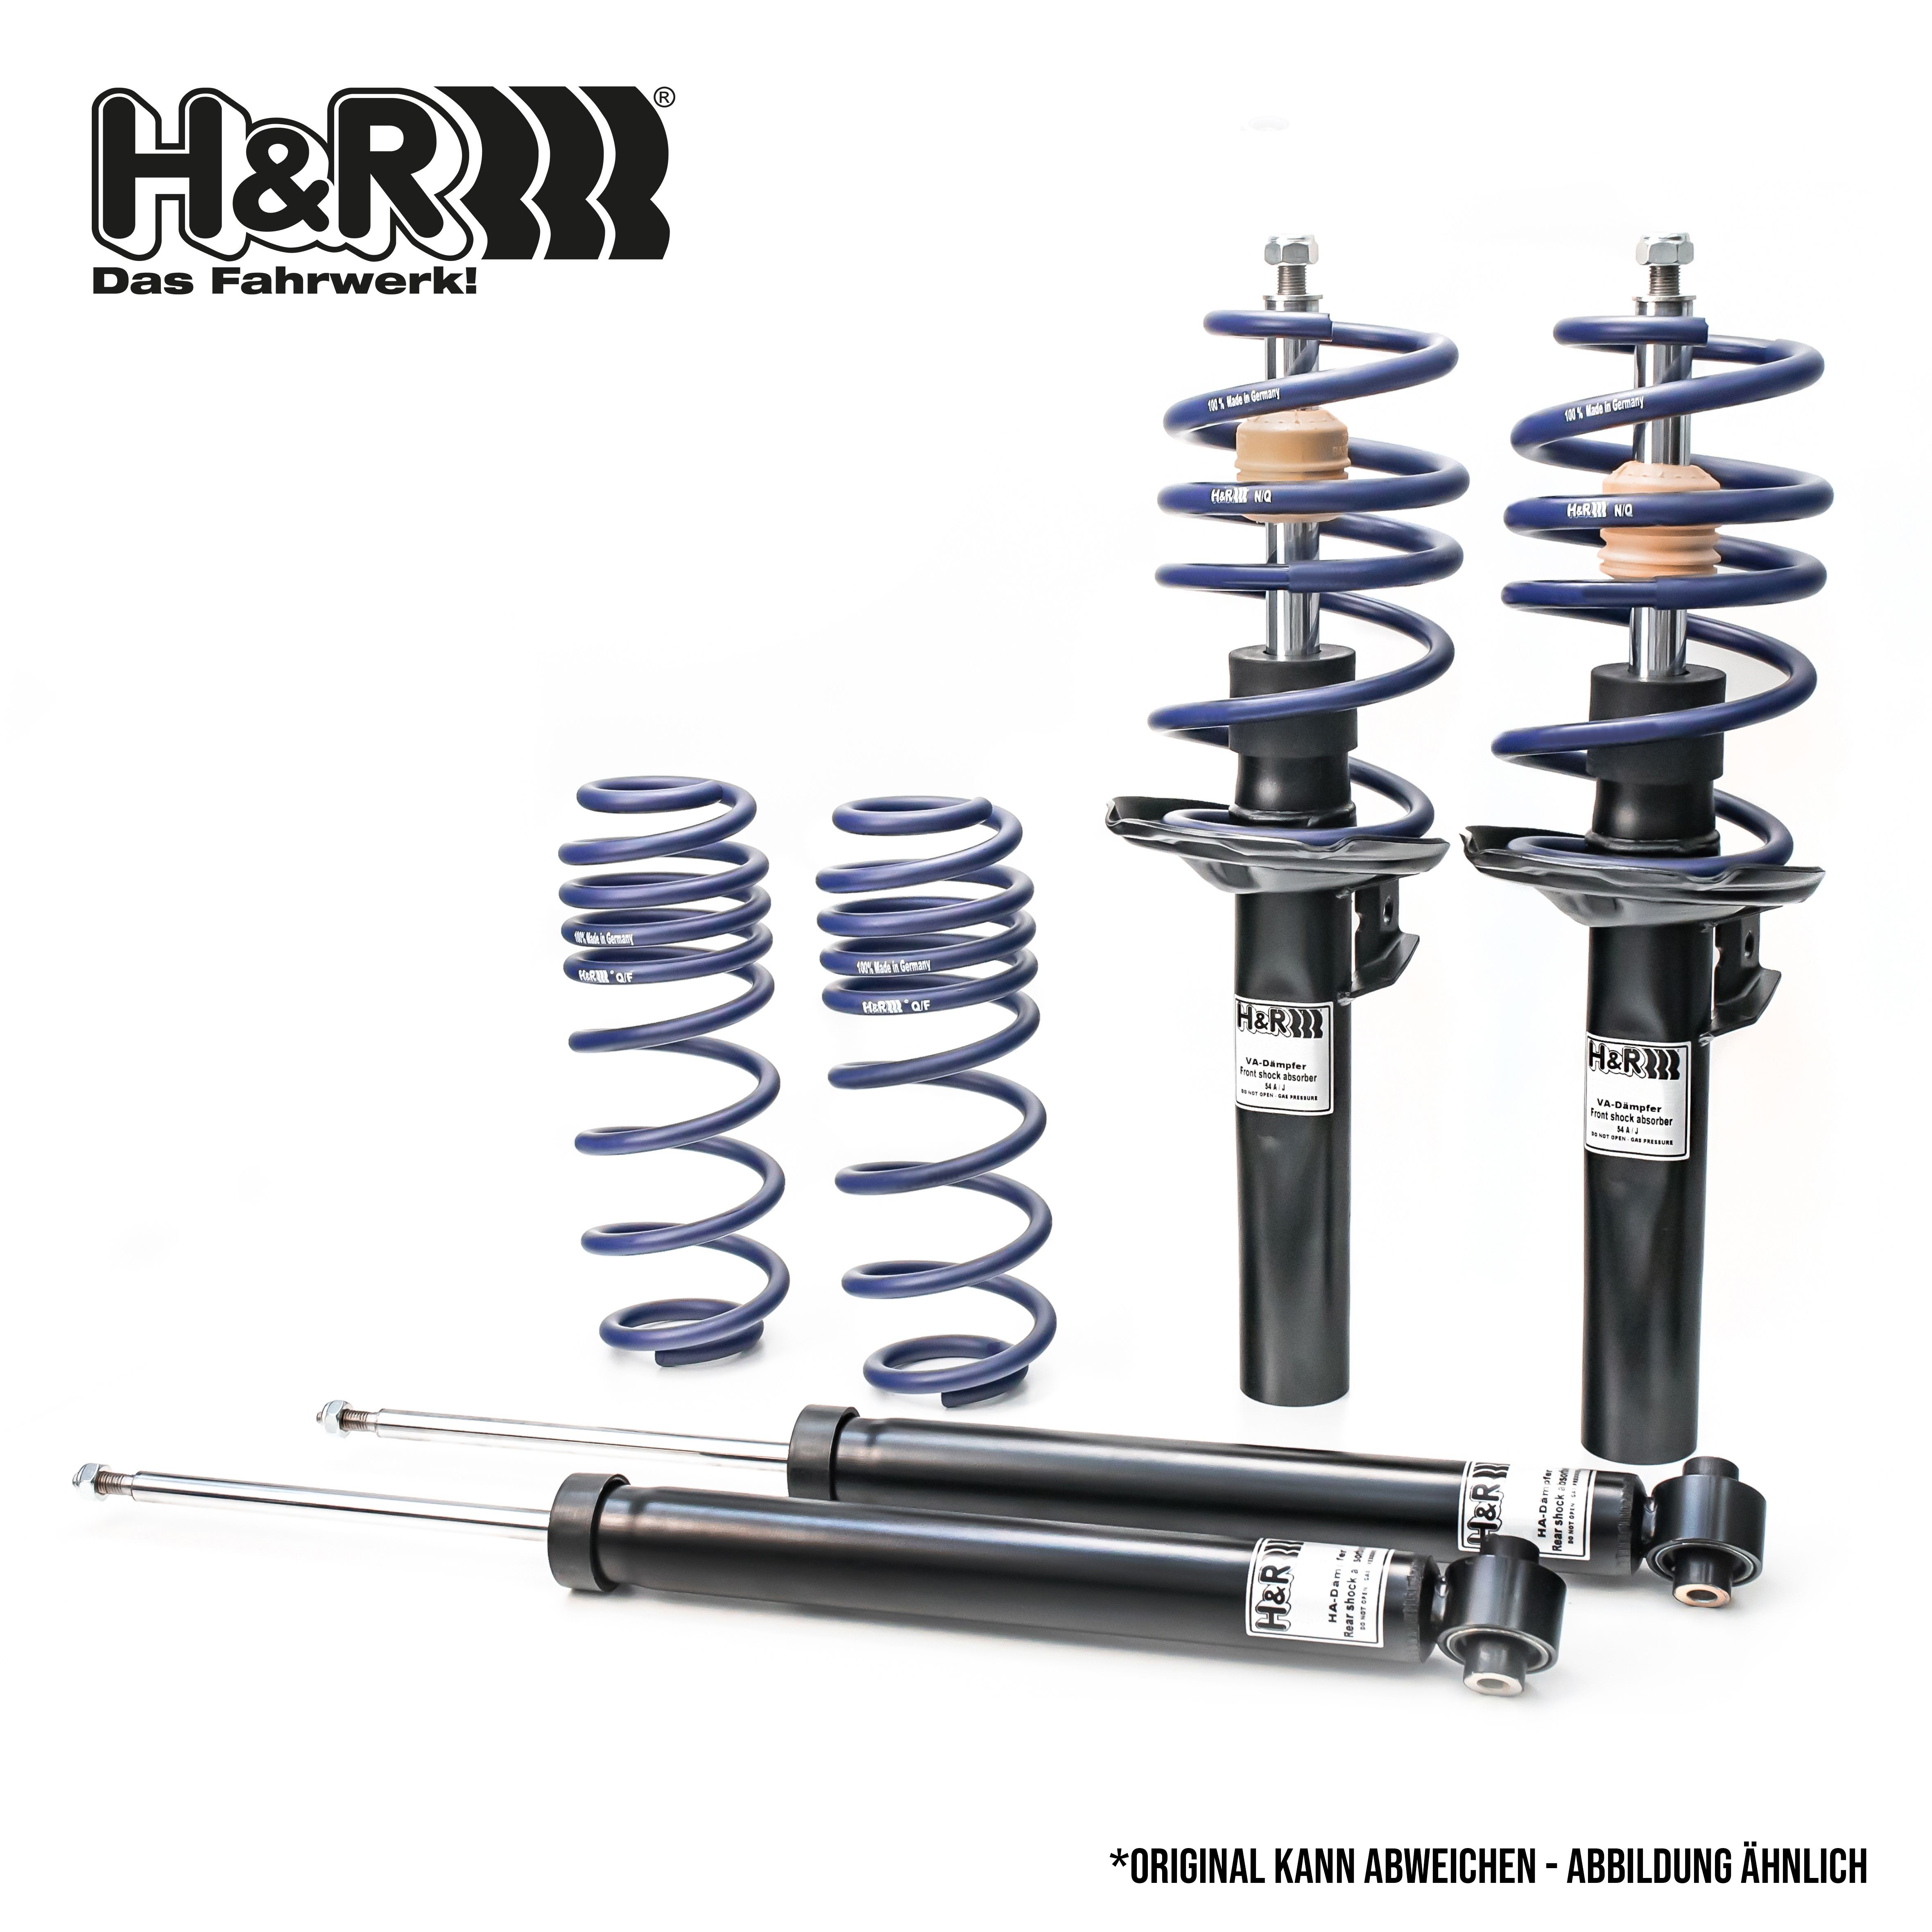 Suspension kit, coil springs / shock absorbers 40539-2 in original quality